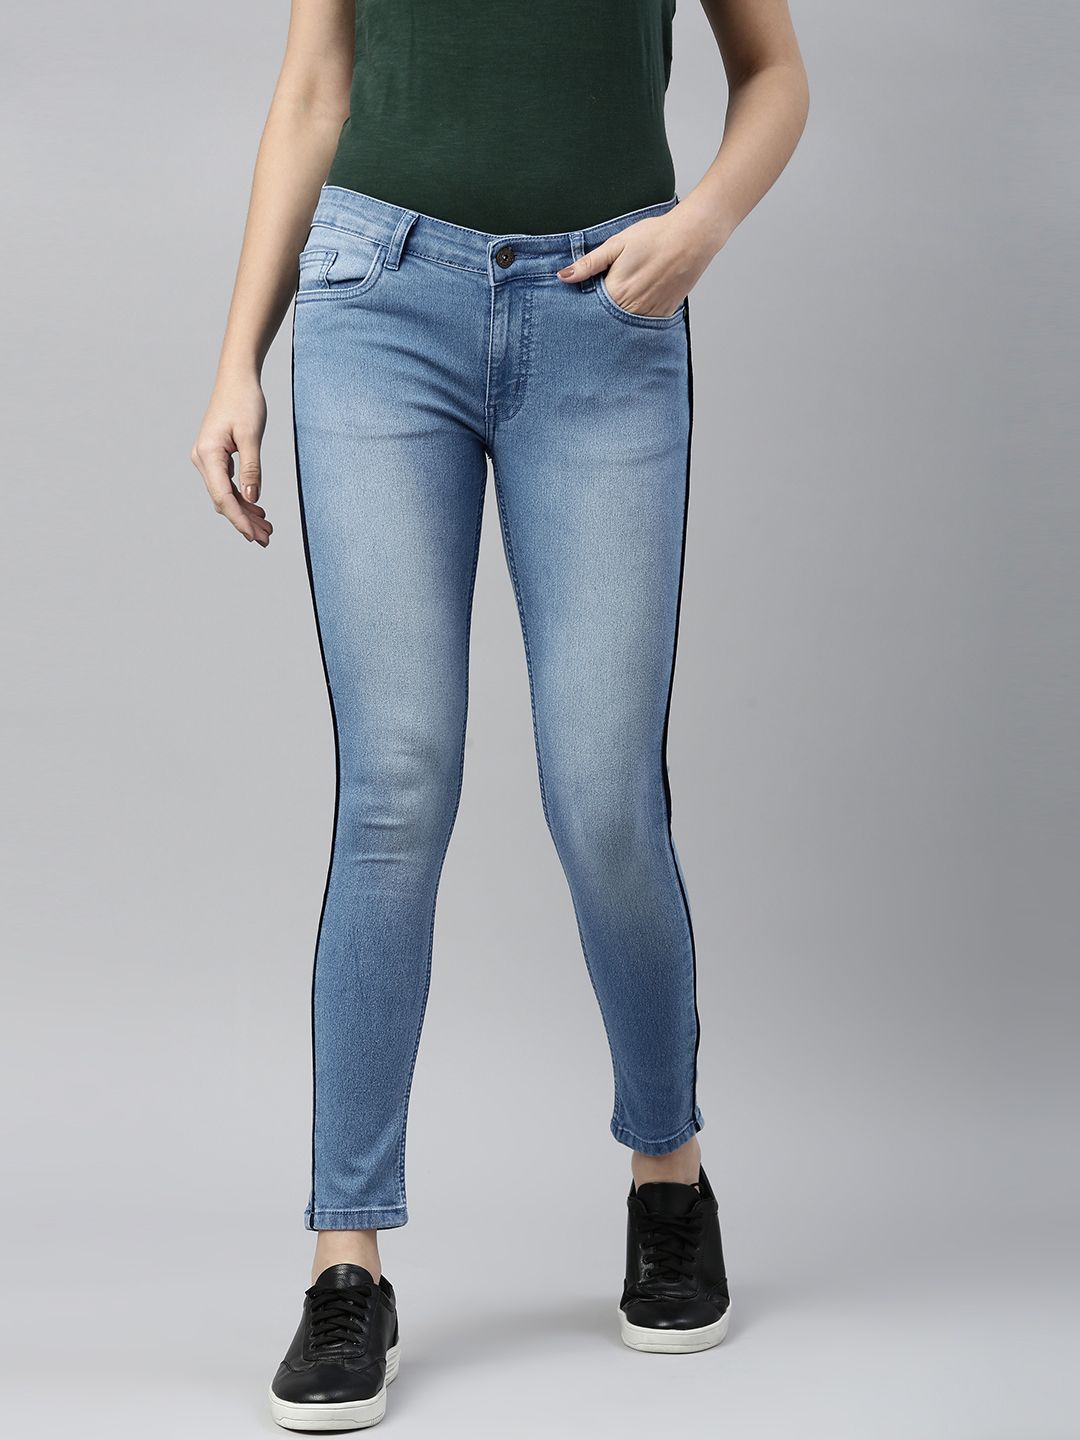 abof Women Blue Slim Fit Light Fade Stretchable Jeans Price in India